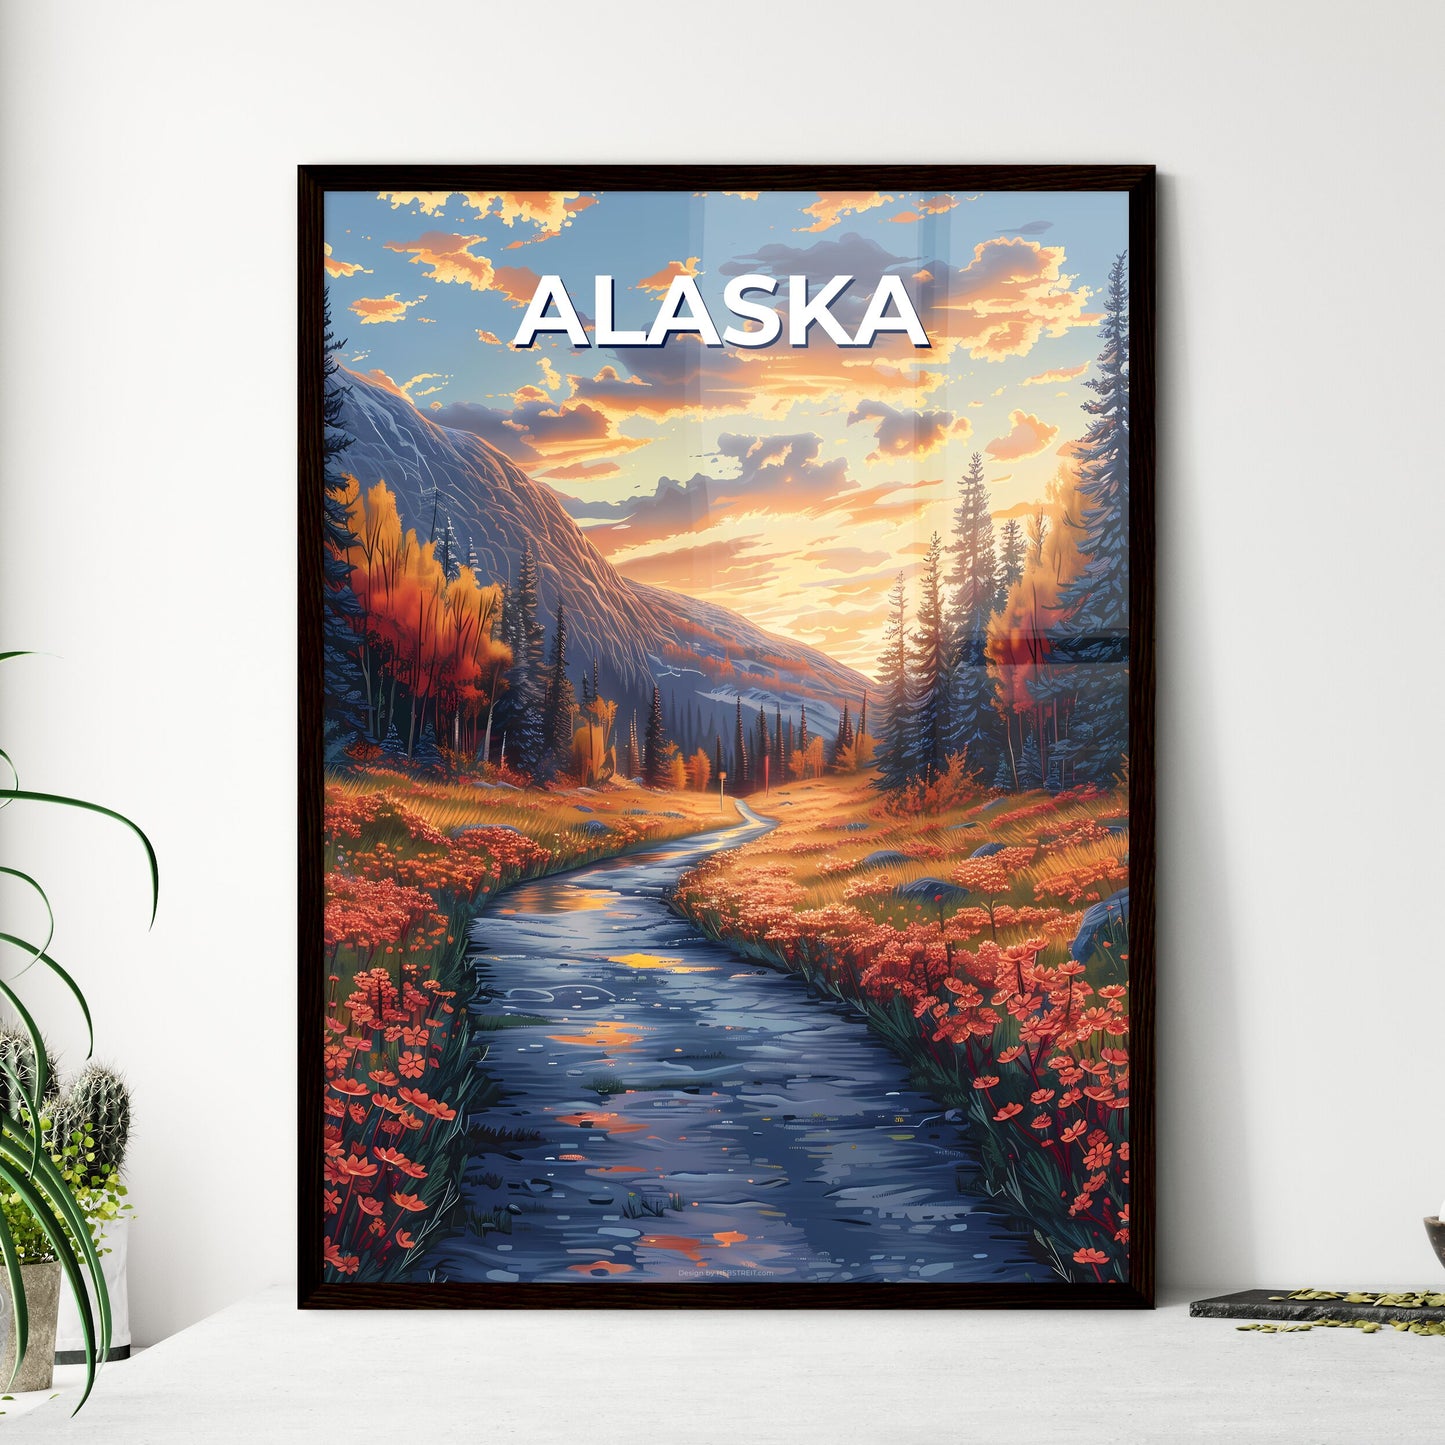 Artistic Depiction of River Flowing Through Lush Alaskan Forest